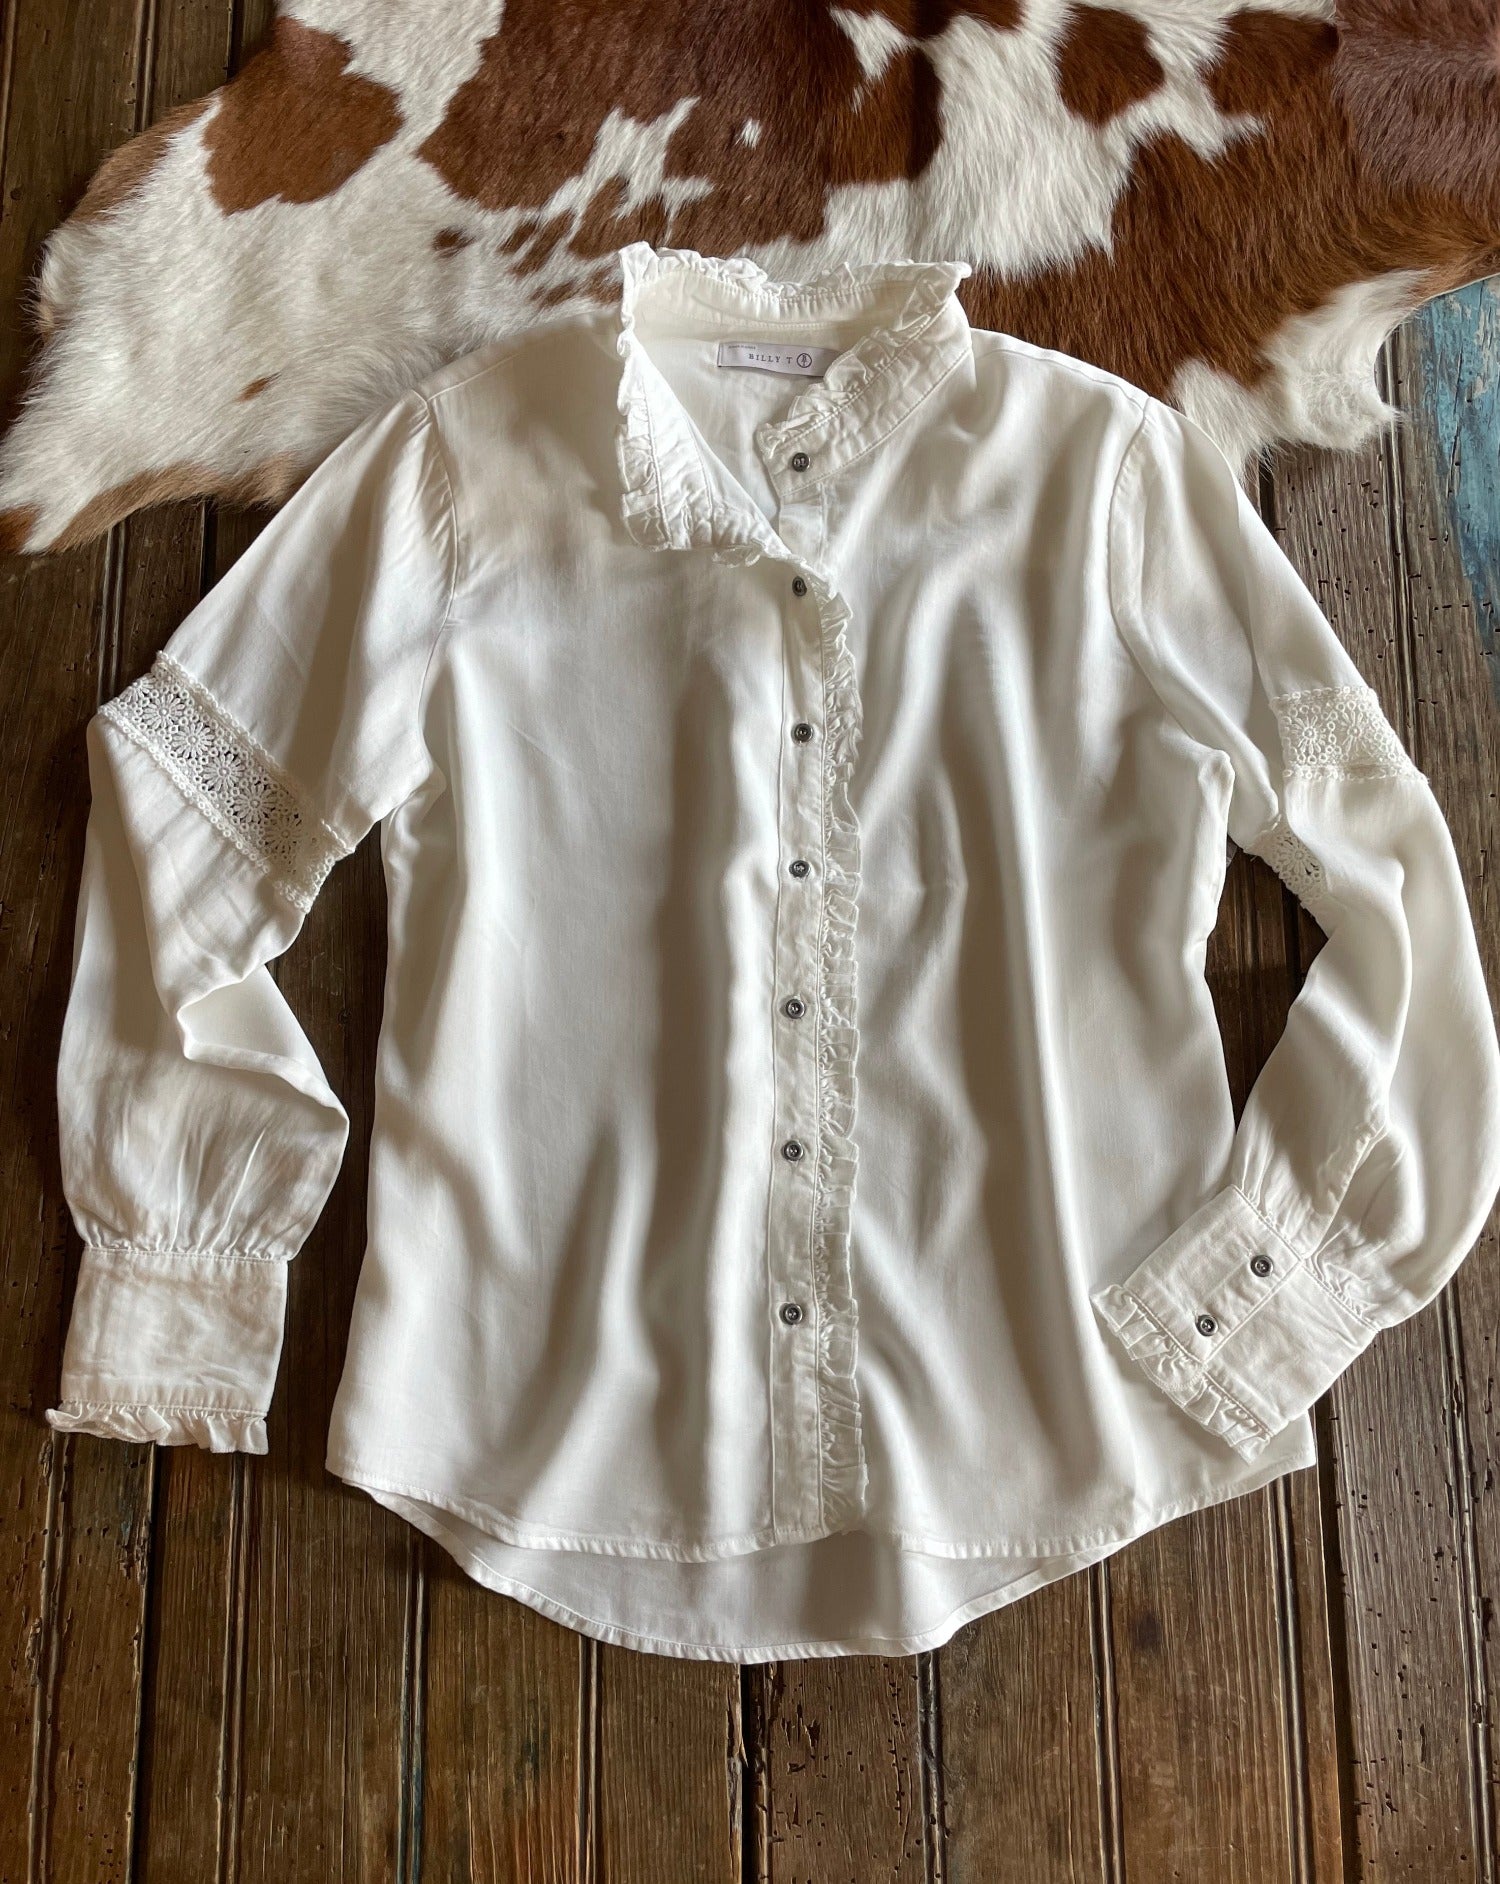 Off white blouse with ruffle details